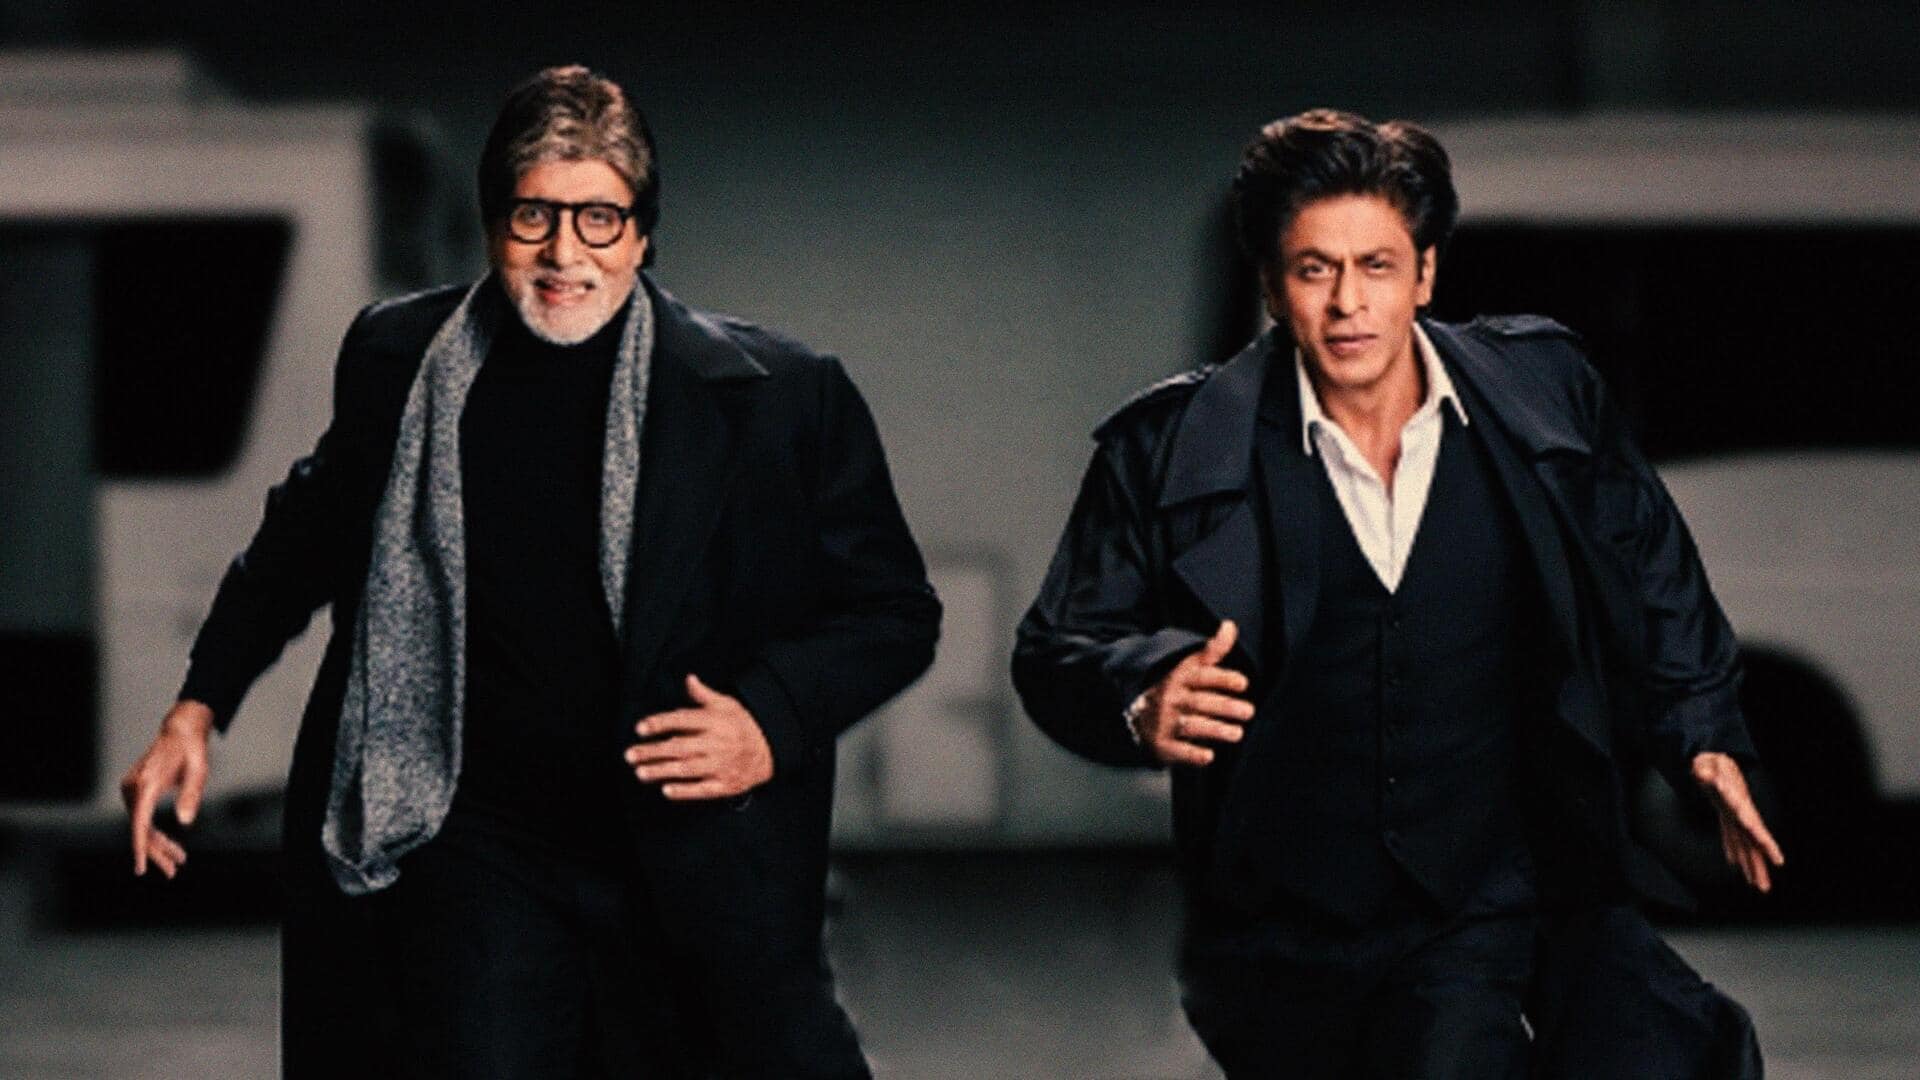 SRK-Amitabh Bachchan to be seen together onscreen after 17 years!